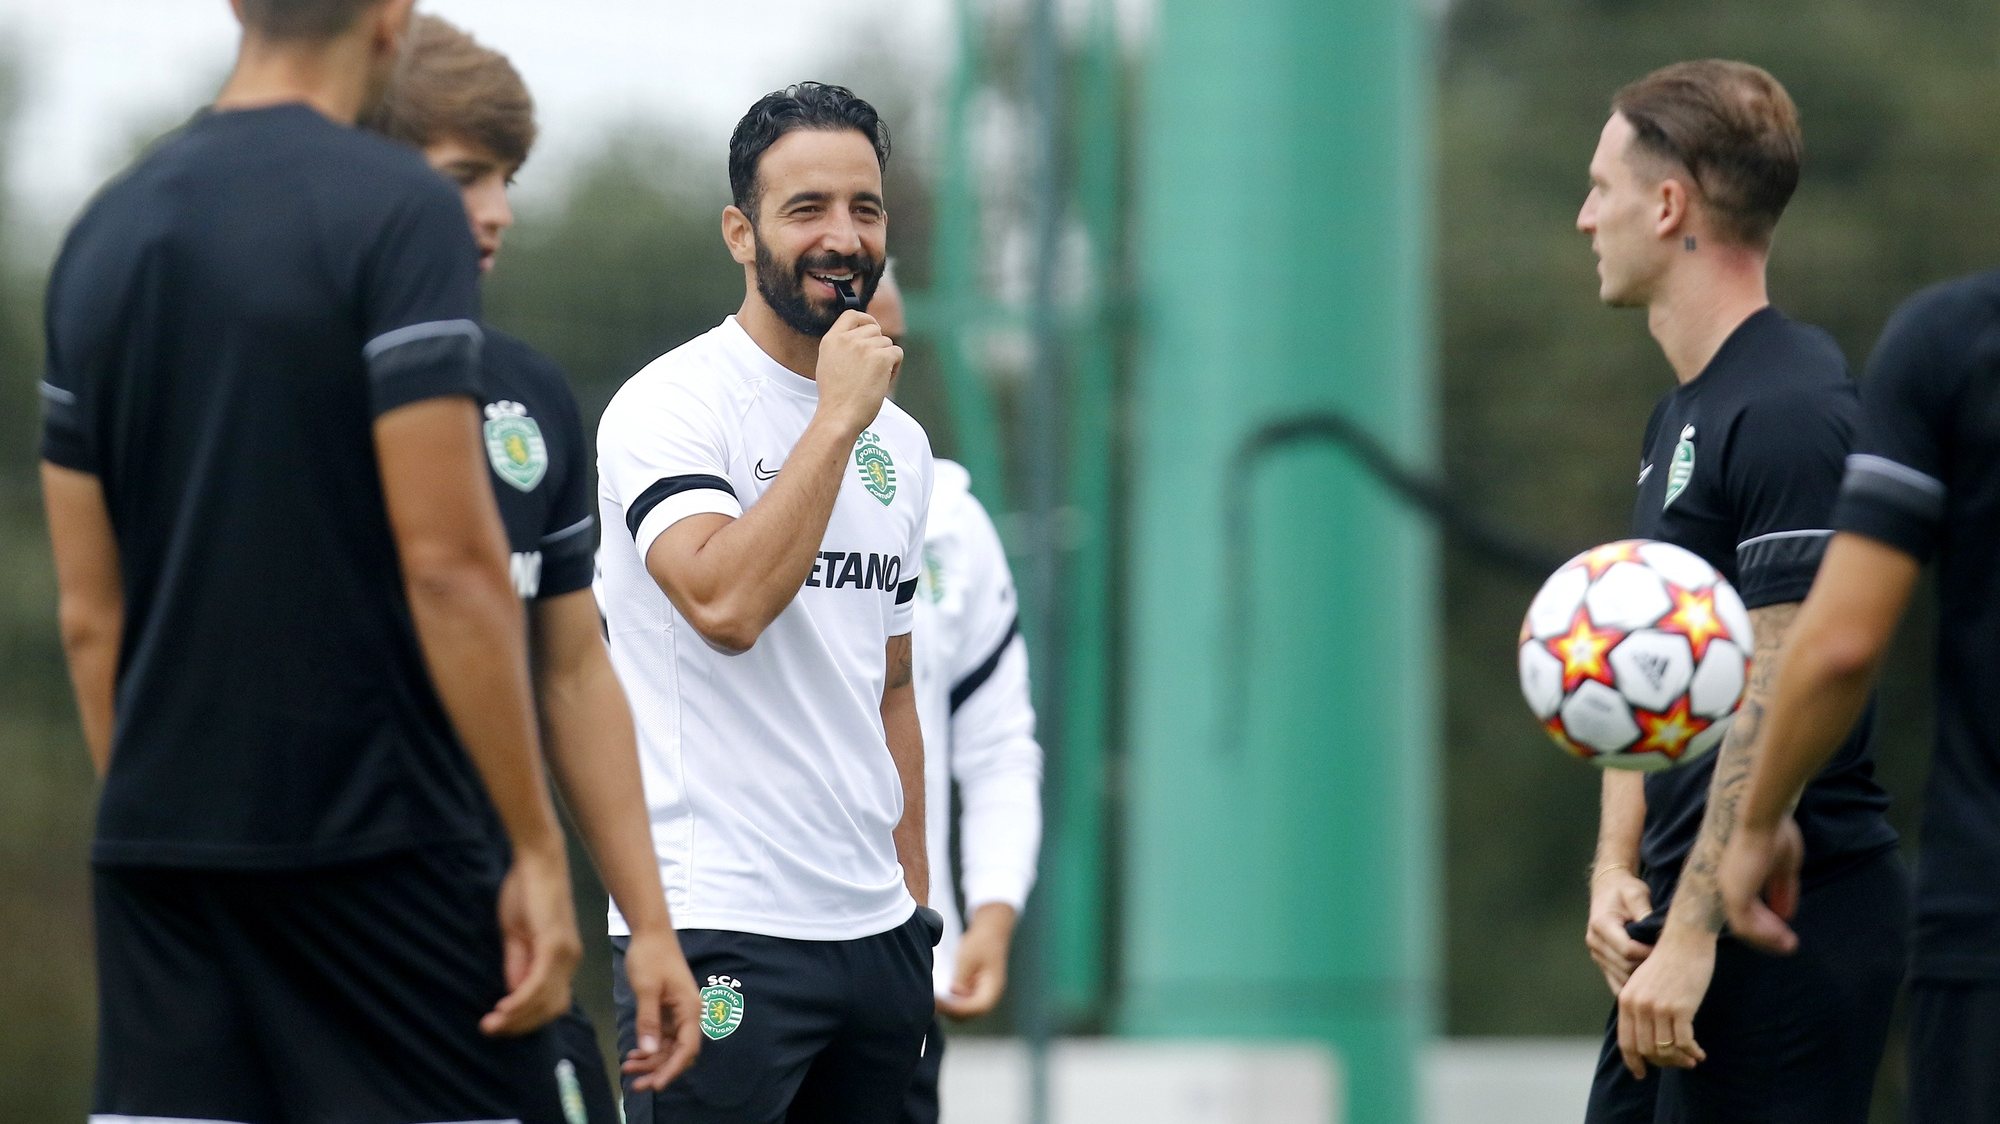 Sporting head coach Ruben Amorim during a training session in preparation for the upcoming Champions League soccer match with Ajax, Alcochete, Portugal, 14th September 2021. RUI MINDERICO/LUSA